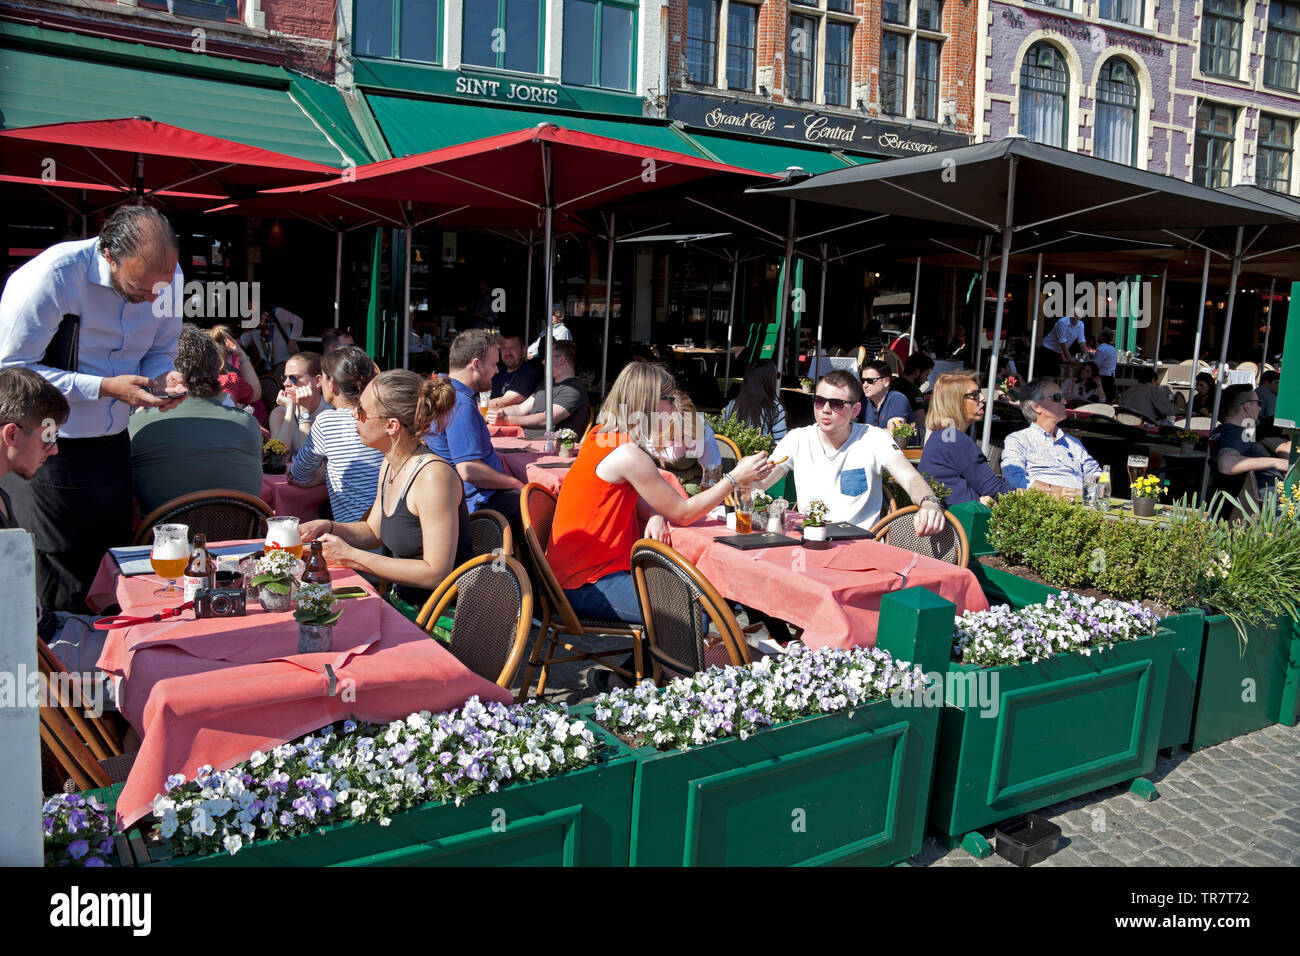 People eating and drinking at cafe bar, Bruges, Belgium, Europe Stock Photo